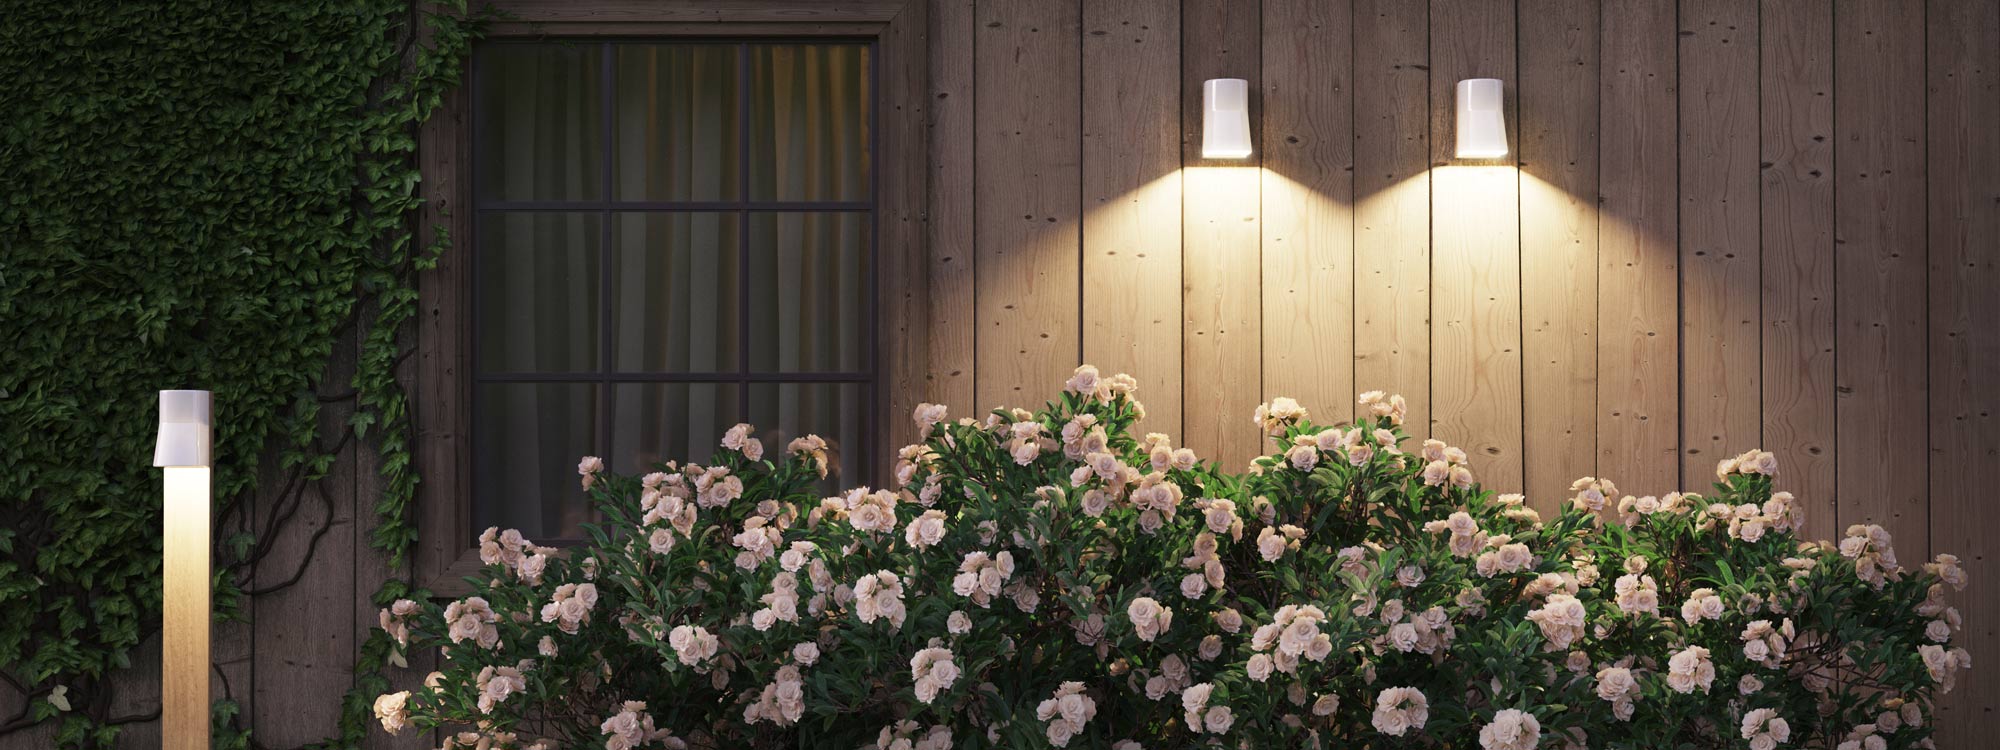 Image of Royal Botania Beacon bollard light and outdoor wall lights in teak and porcelain